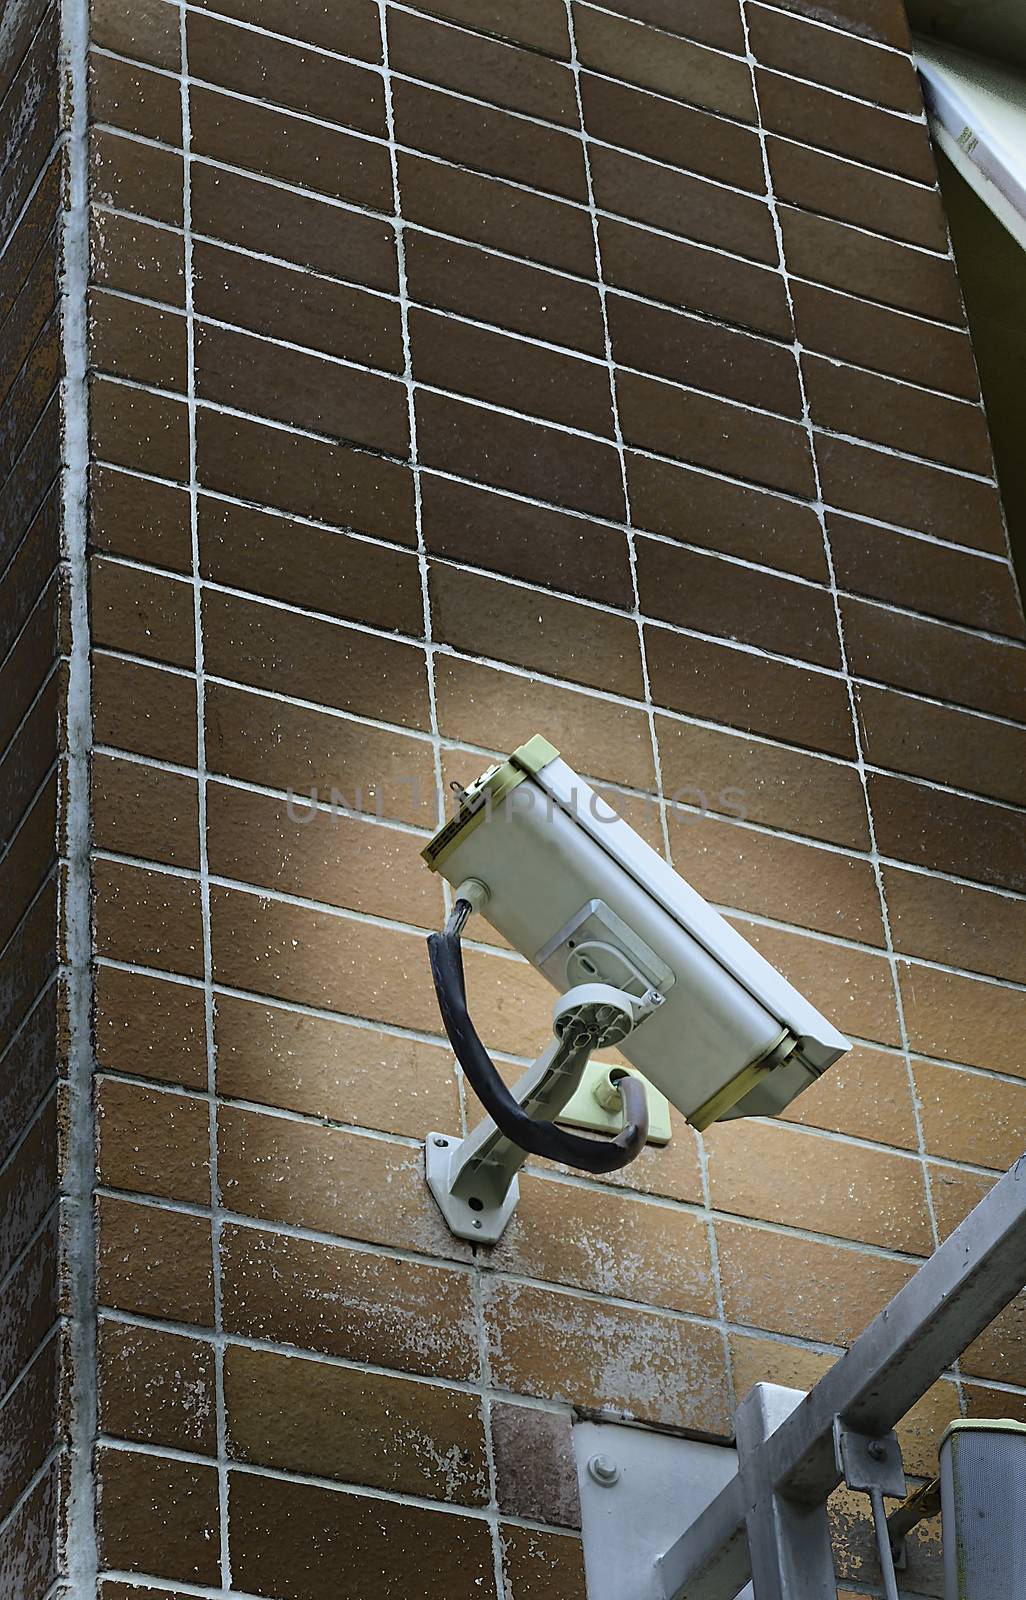 The CCTV camera secure monitor set on the wall to watch and record anything.